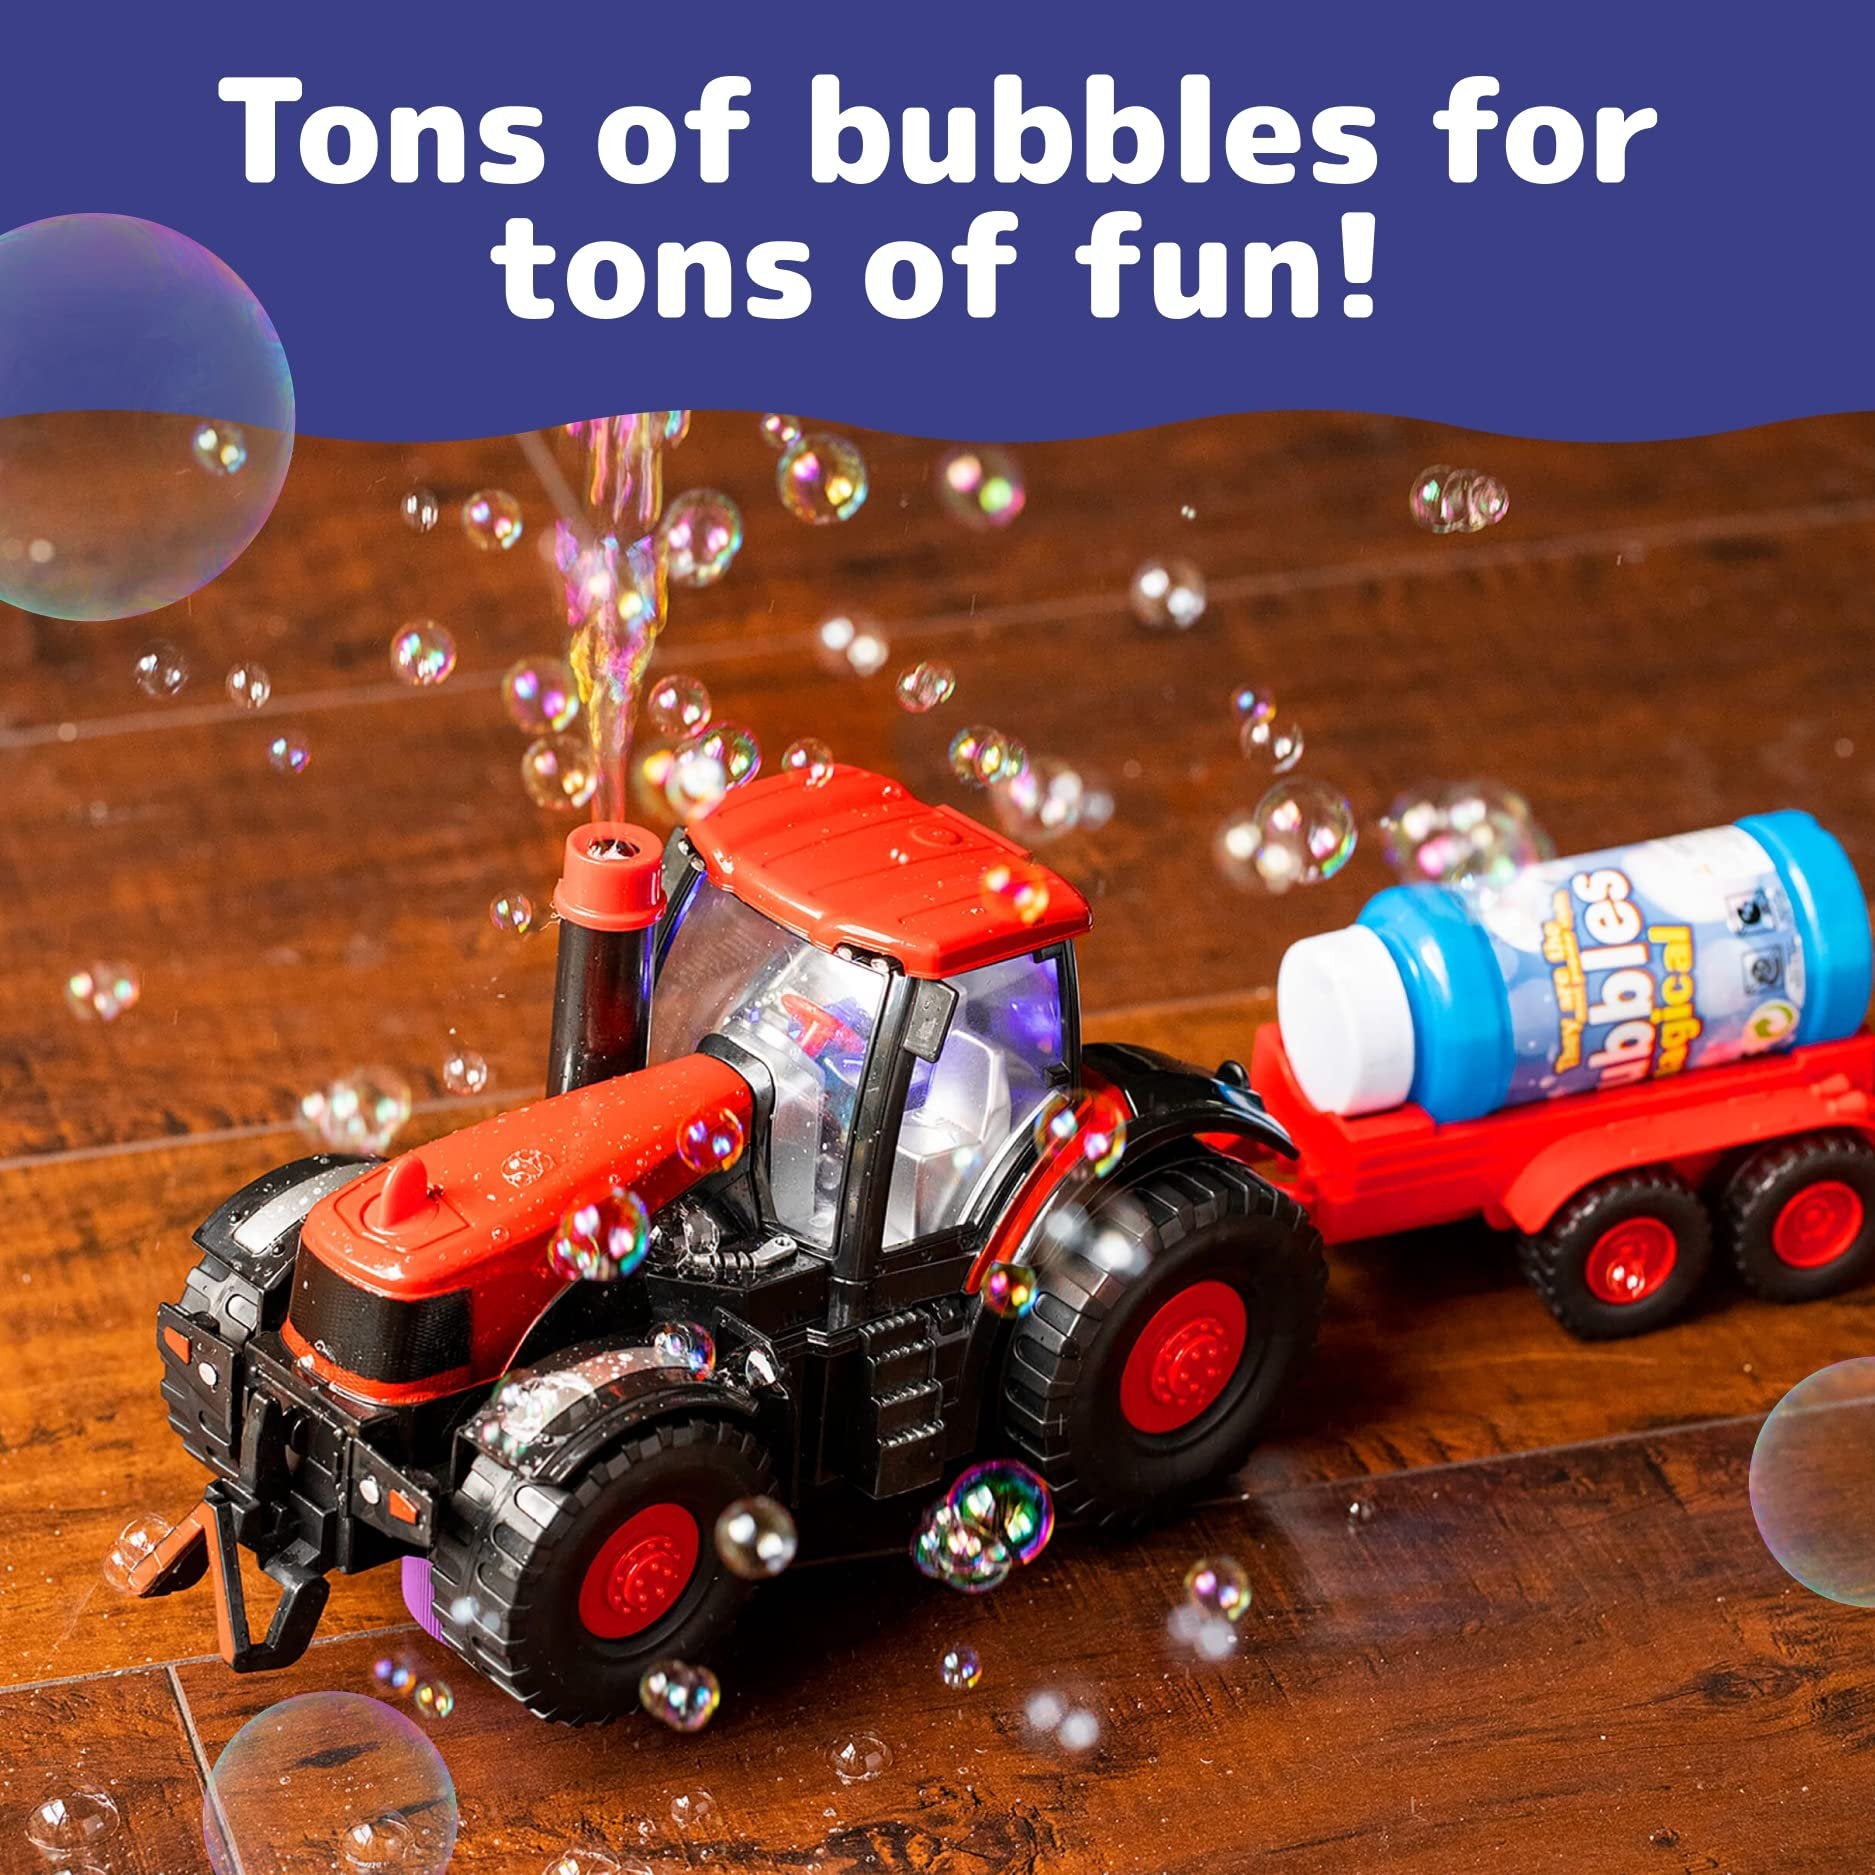 Prextex Bump & Go Bubble Blowing Farm Tractor Toy Truck with Lights, Sounds, and Action for Toddlers - Bubble Solution Included with Toy Tractors - Kids Tractor Toys for 2 Year Old Boy to 3+ Years Old